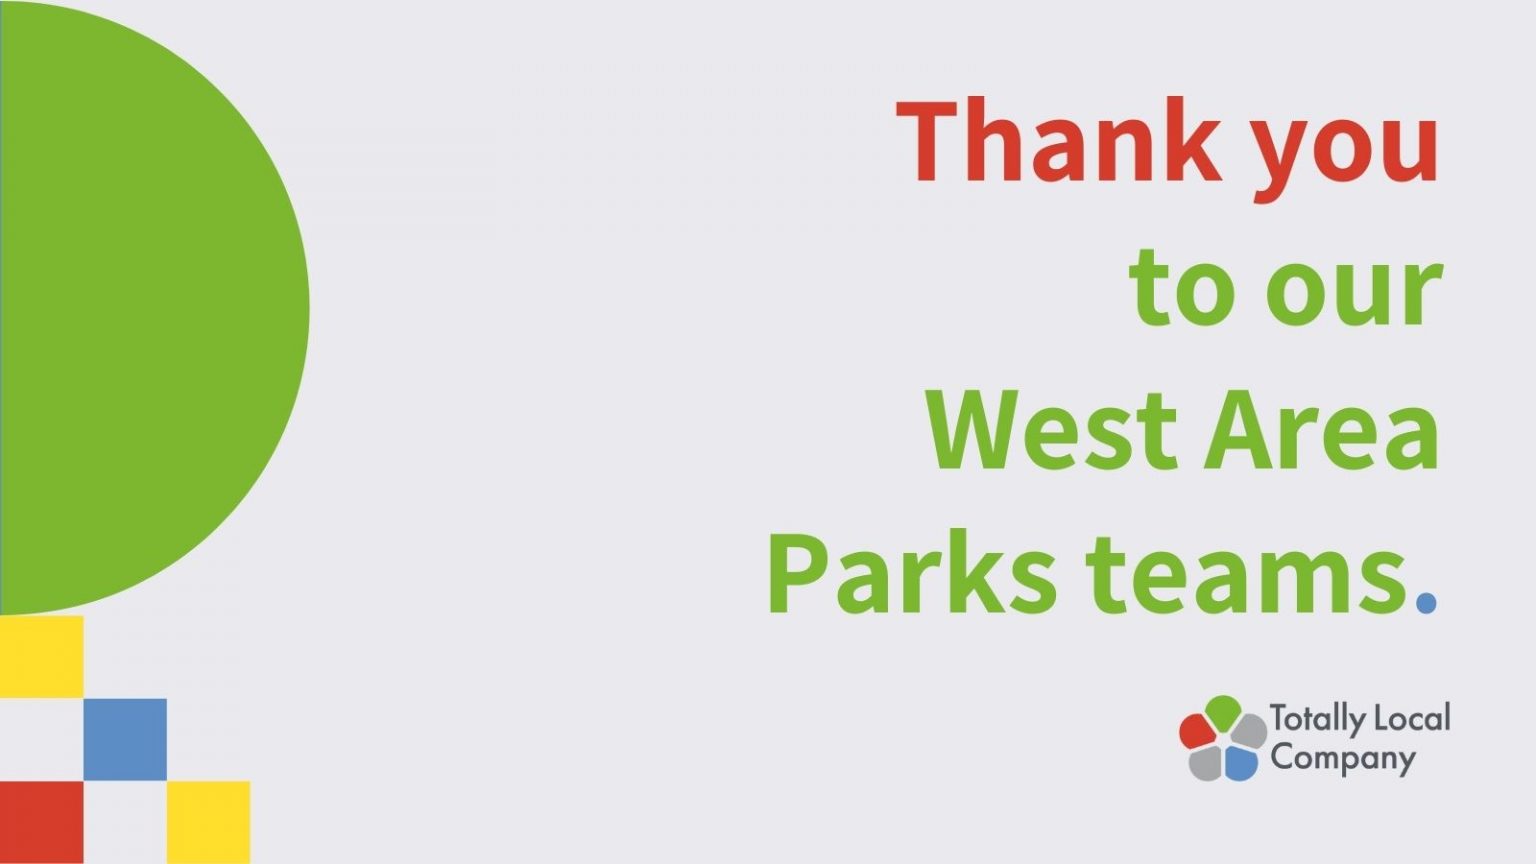 Parks thank you